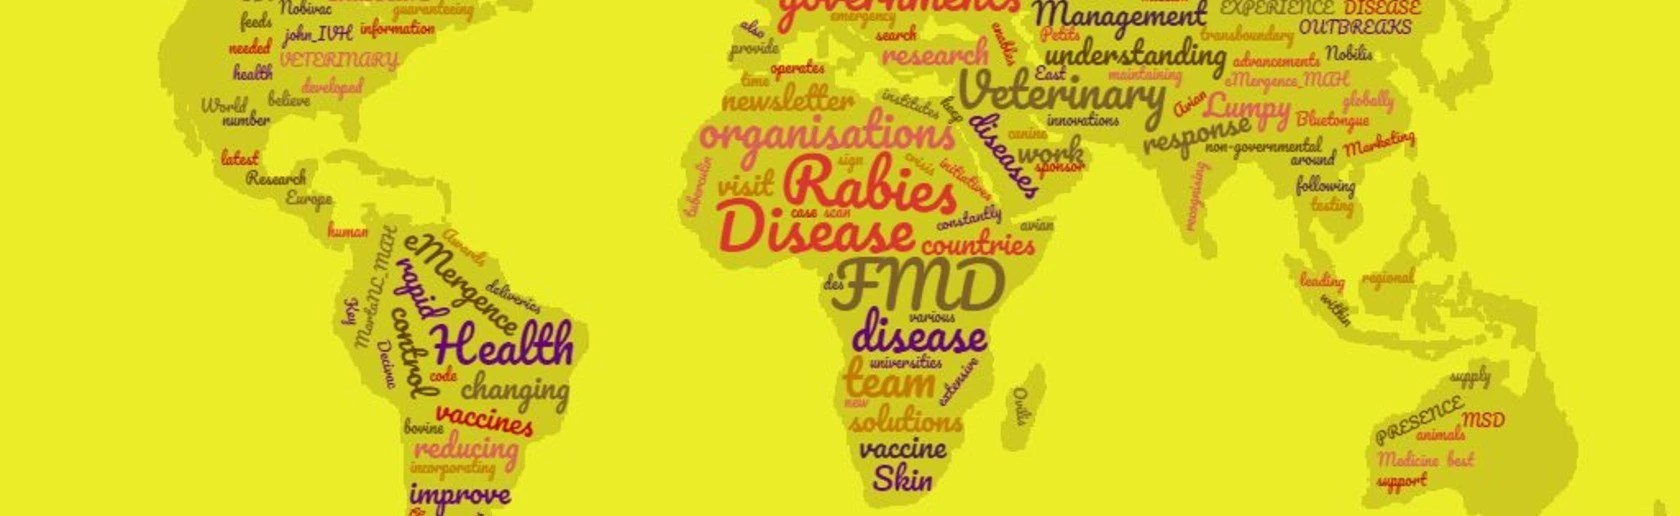 Frontline of shifting diseases banner image - World map with the countries filled with the names of diseases